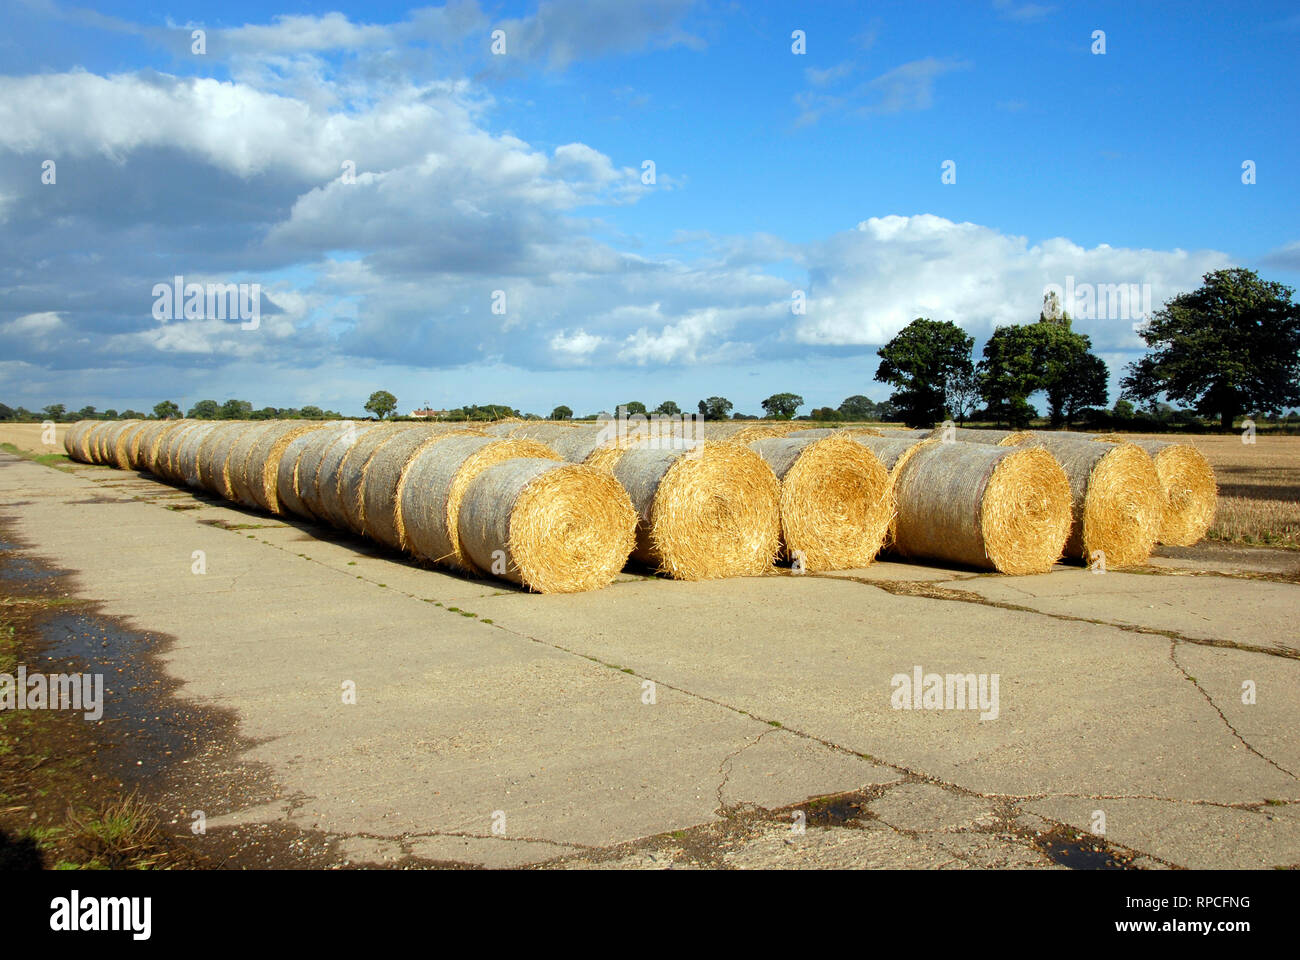 Straw bales stored temporarily on the former runway of a disused World War II airfield now reverted to farming, Norfolk, England Stock Photo